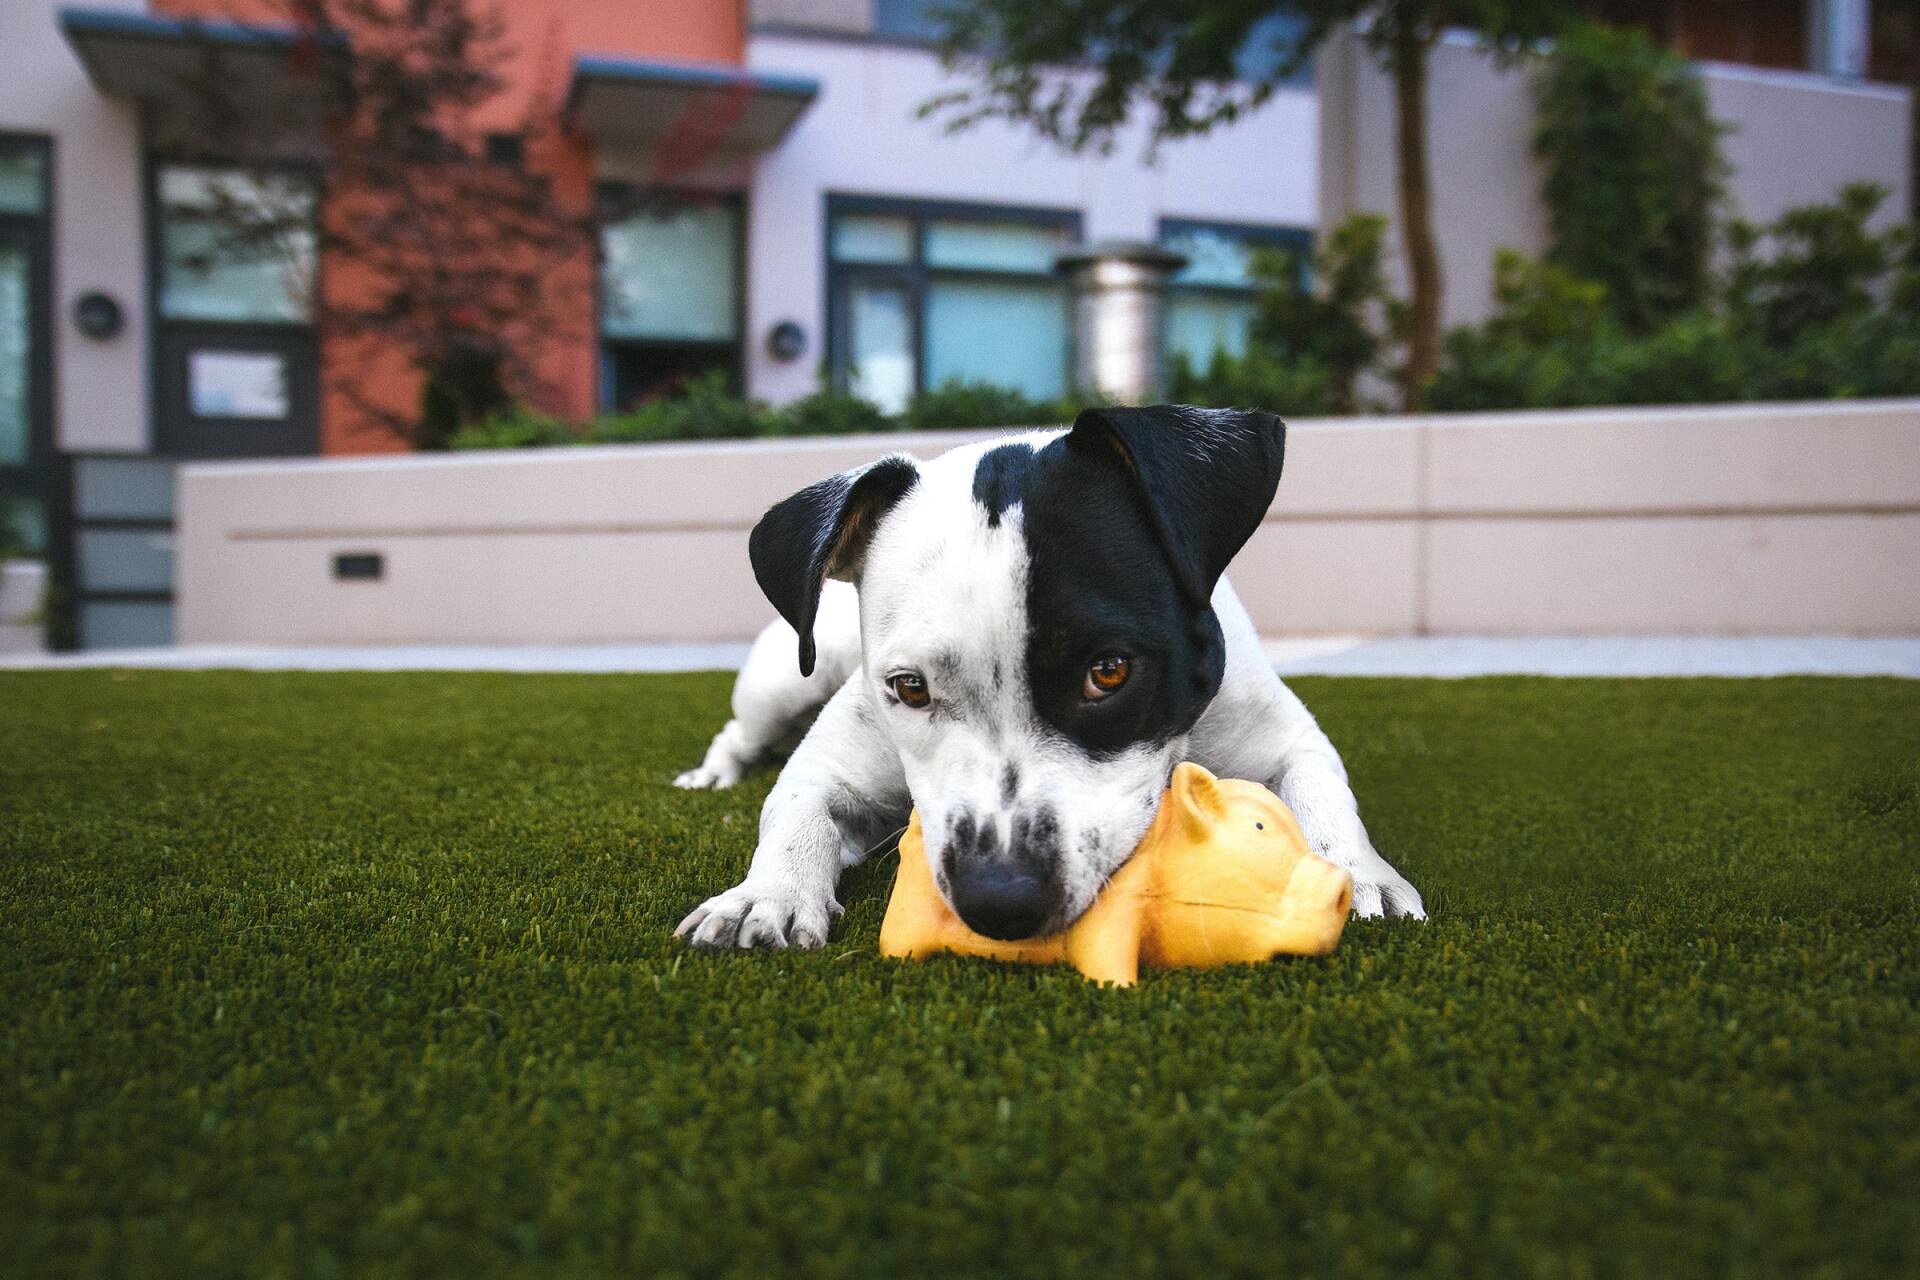 The pet turf is giving the dog a relaxing and tender feel, as evidenced by its playfulness.